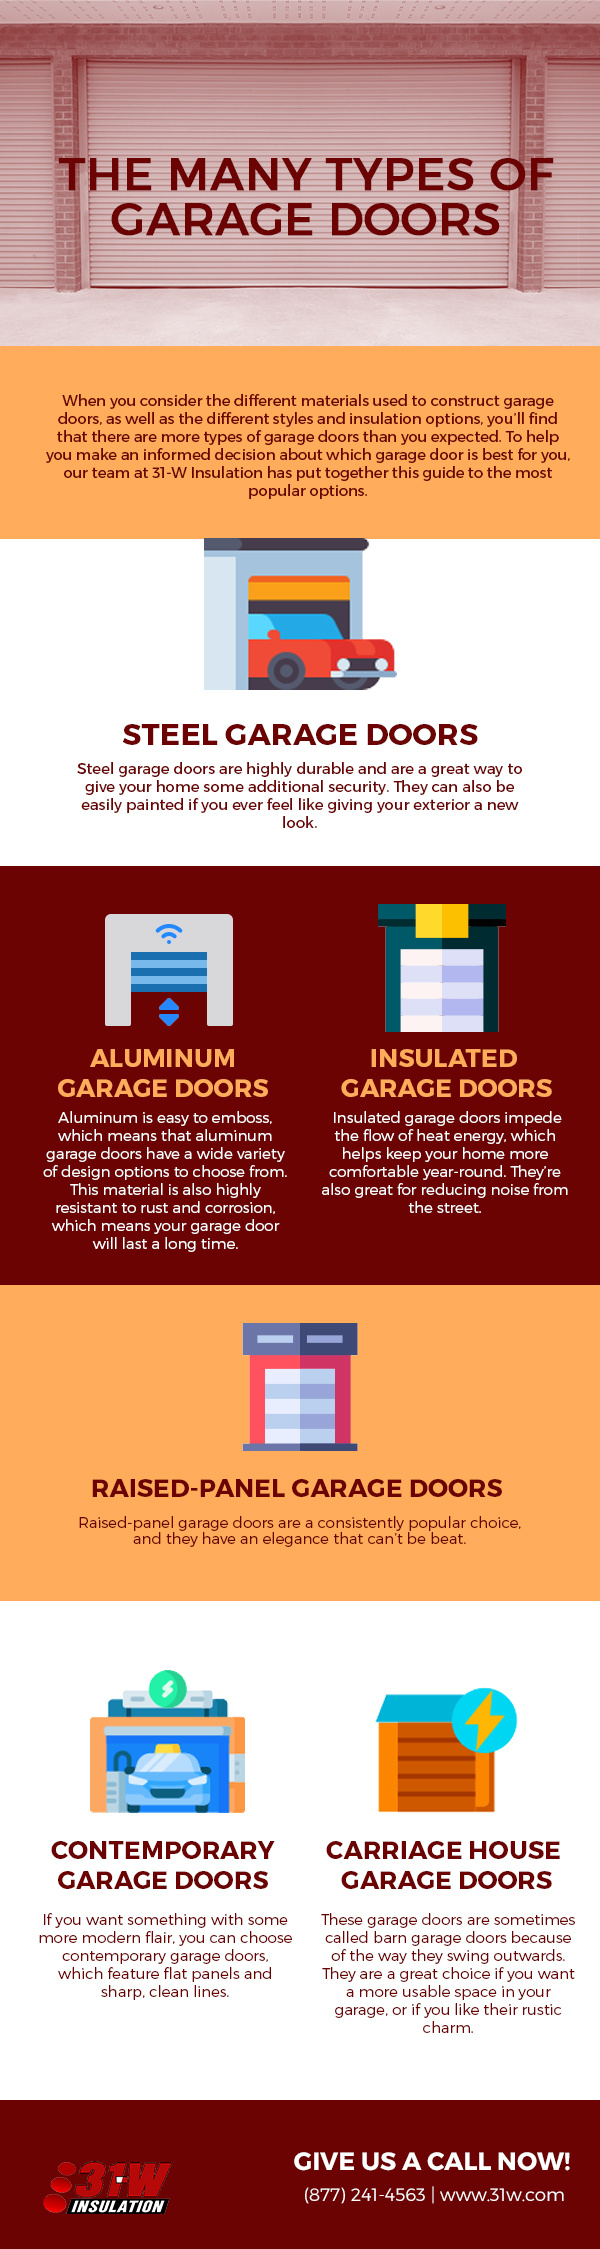 The Many Types of Garage Doors [infographic]